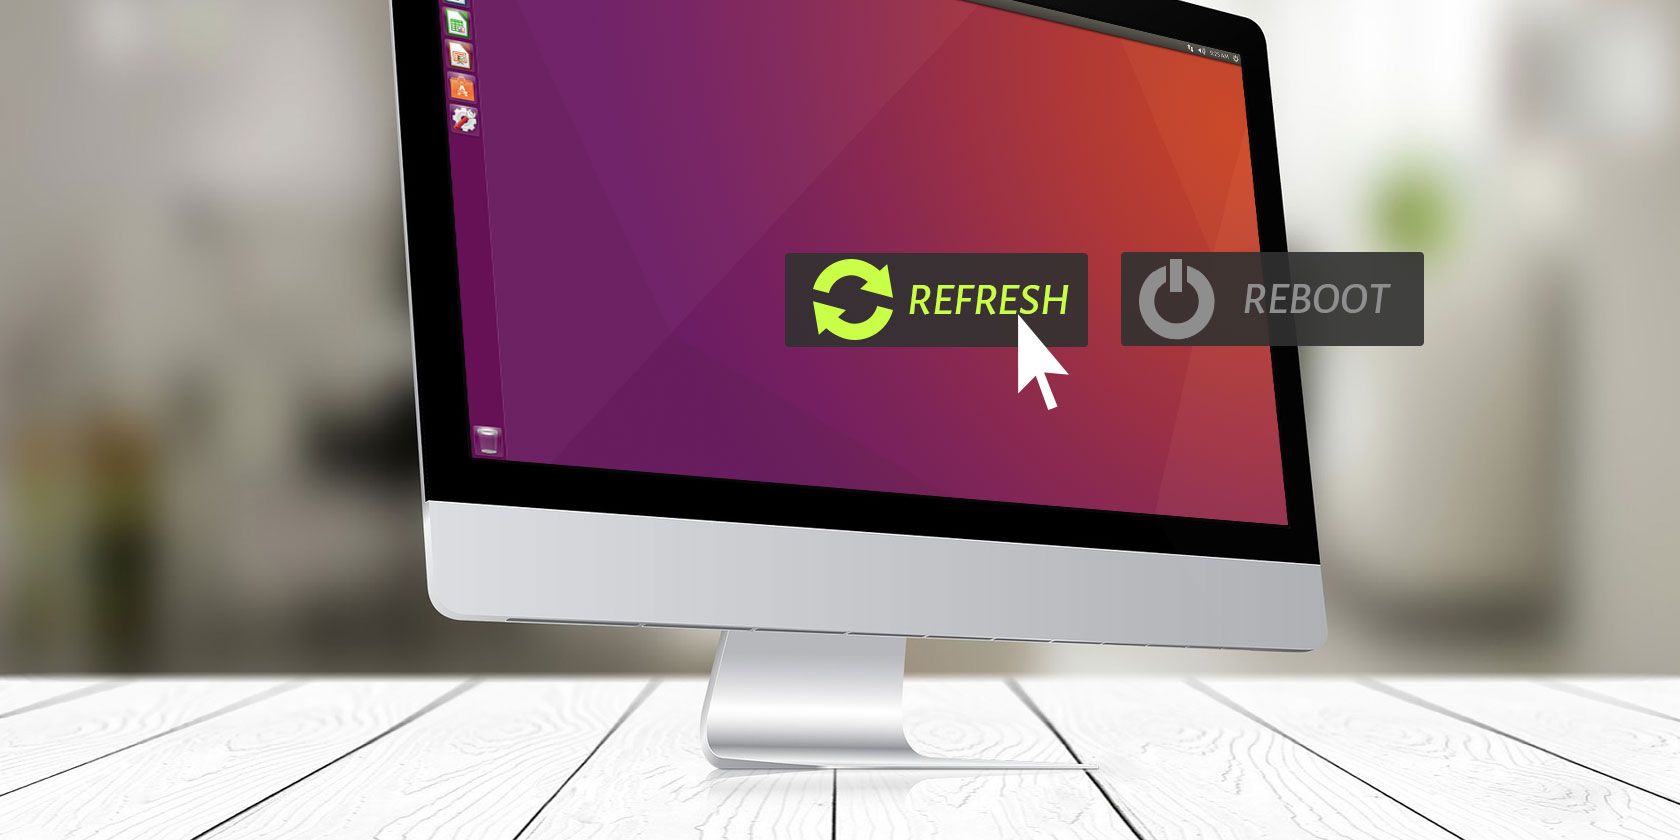 How to Refresh Your Linux Desktop Without Rebooting